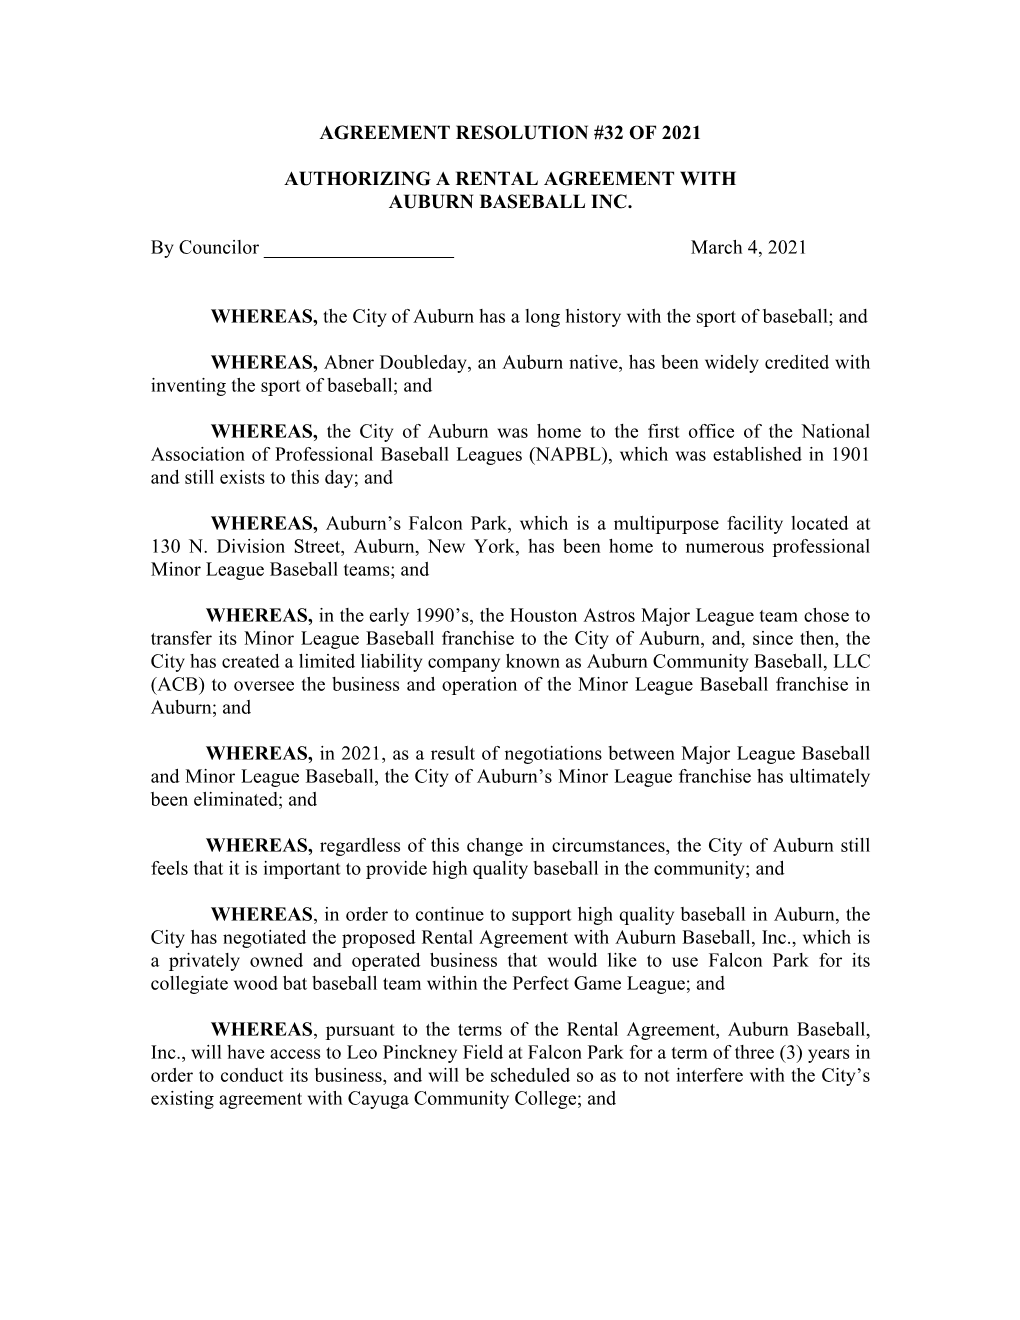 AGREEMENT RESOLUTION #32 of 2021 AUTHORIZING a RENTAL AGREEMENT with AUBURN BASEBALL INC. by Councilor